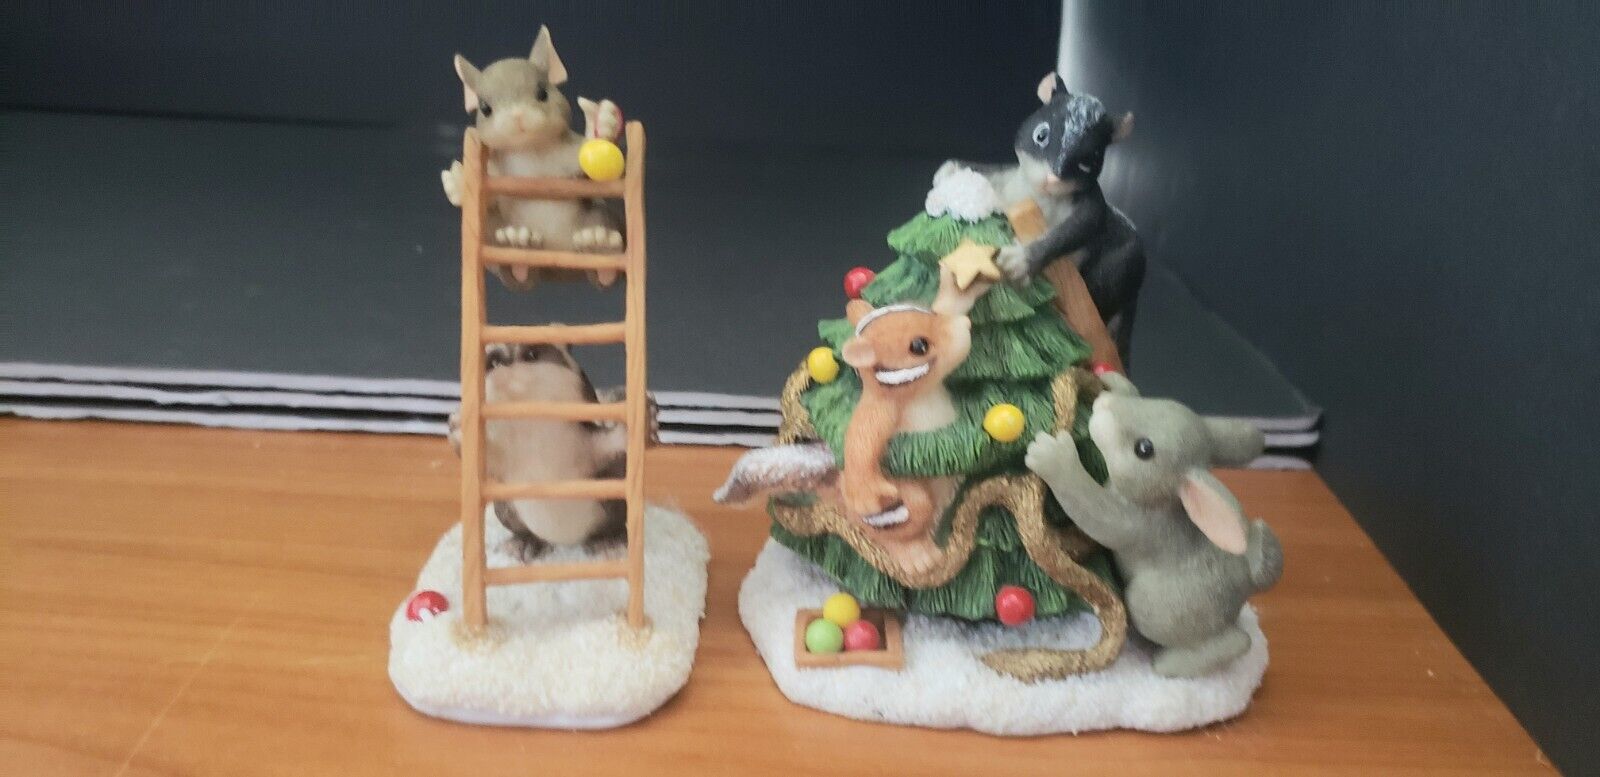 Charming Tails Trimming the Tree Set of 2 Christmas Mouse Figurines 1997 